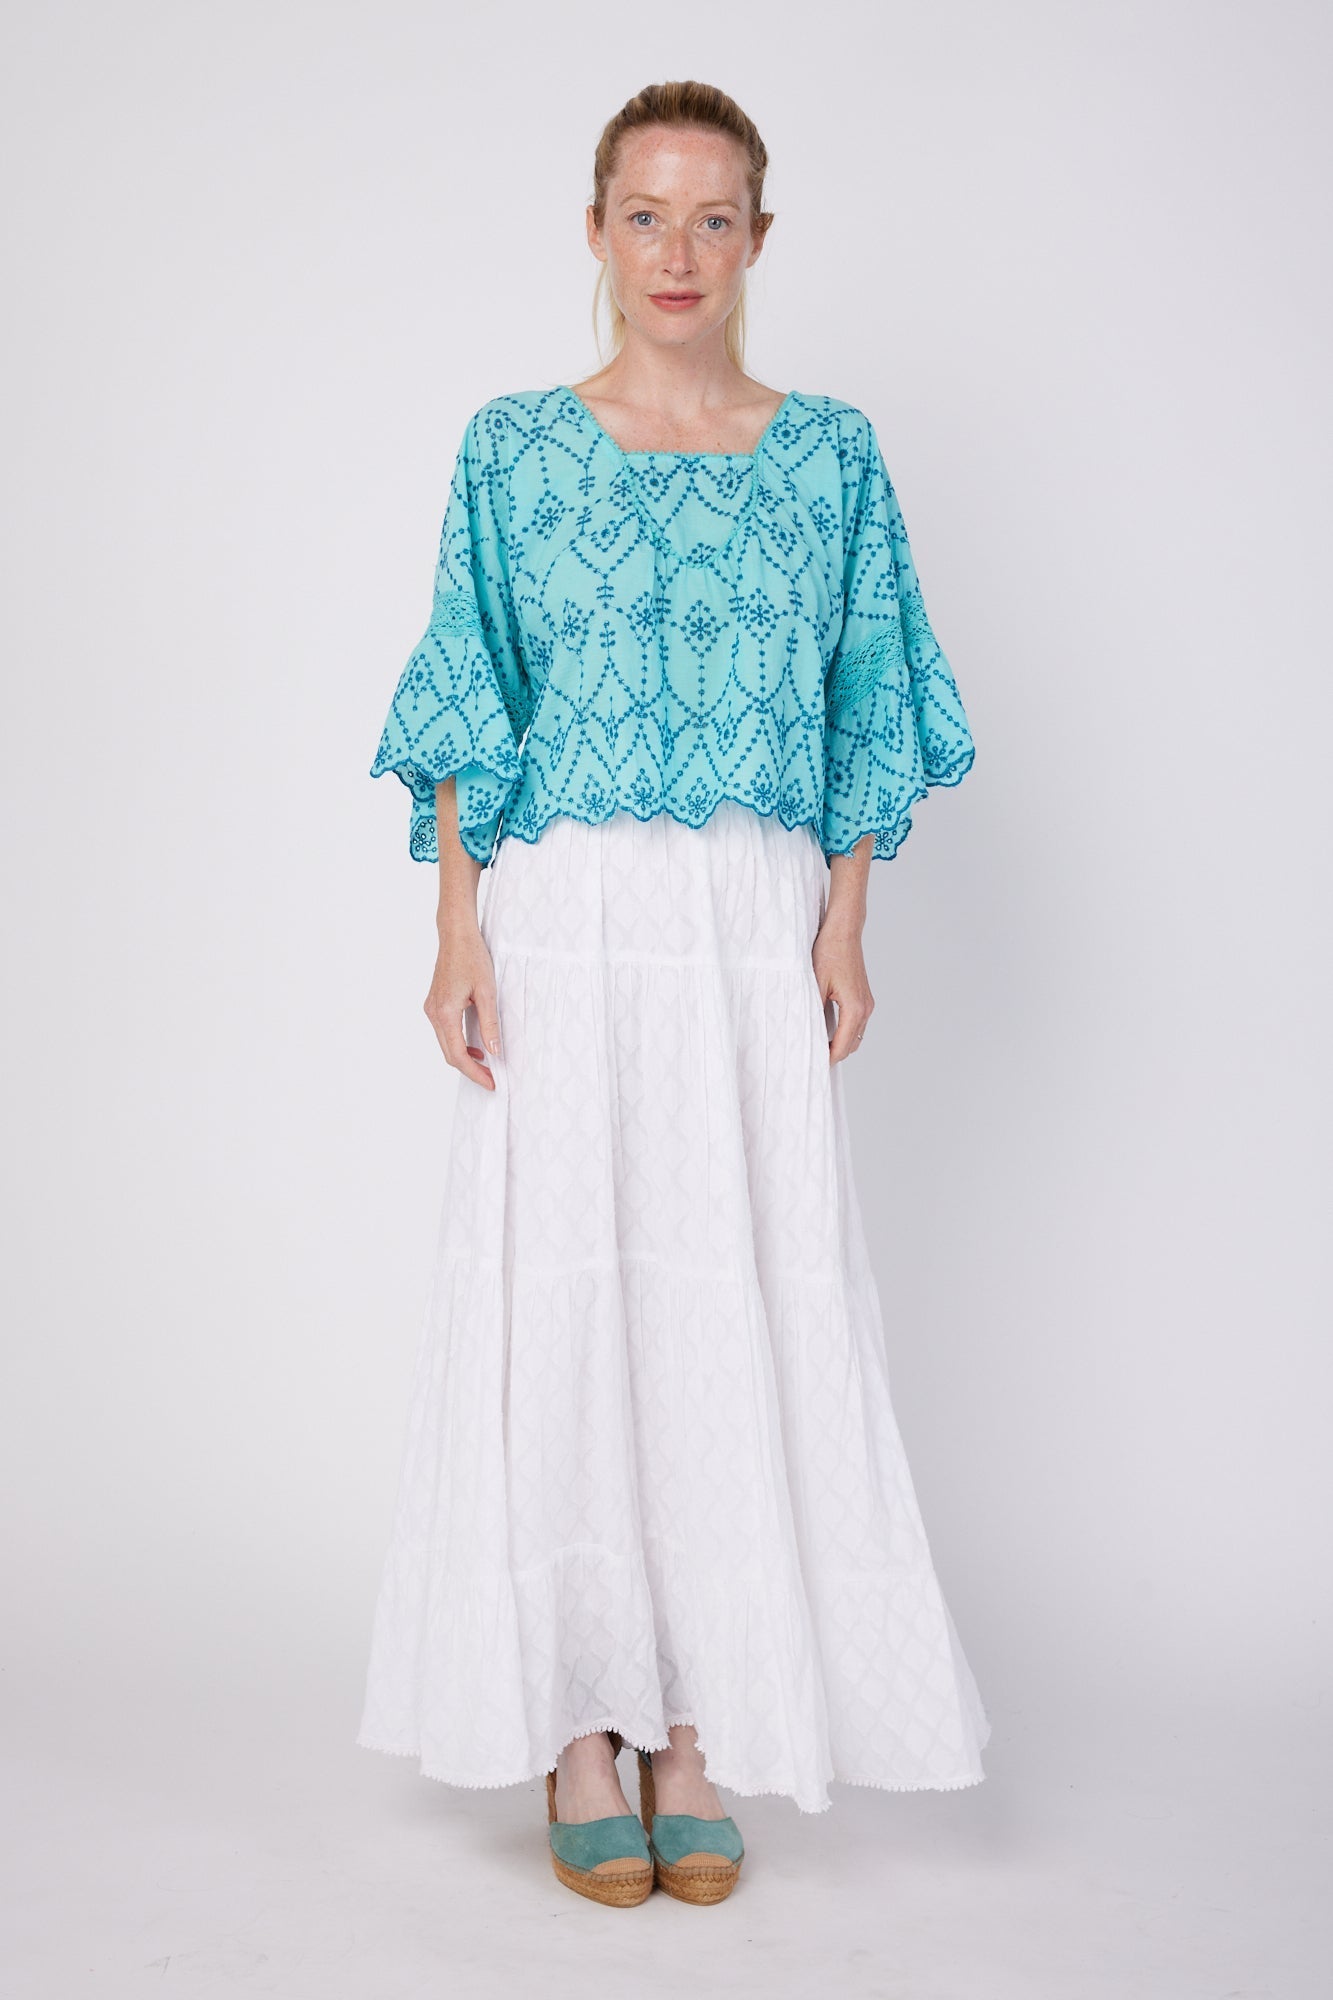 ModaPosa Agnesia Maxi Jacquard Skirt with Lace Trim in White . Discover women's resort dresses and lifestyle clothing inspired by the Mediterranean. Free worldwide shipping available!